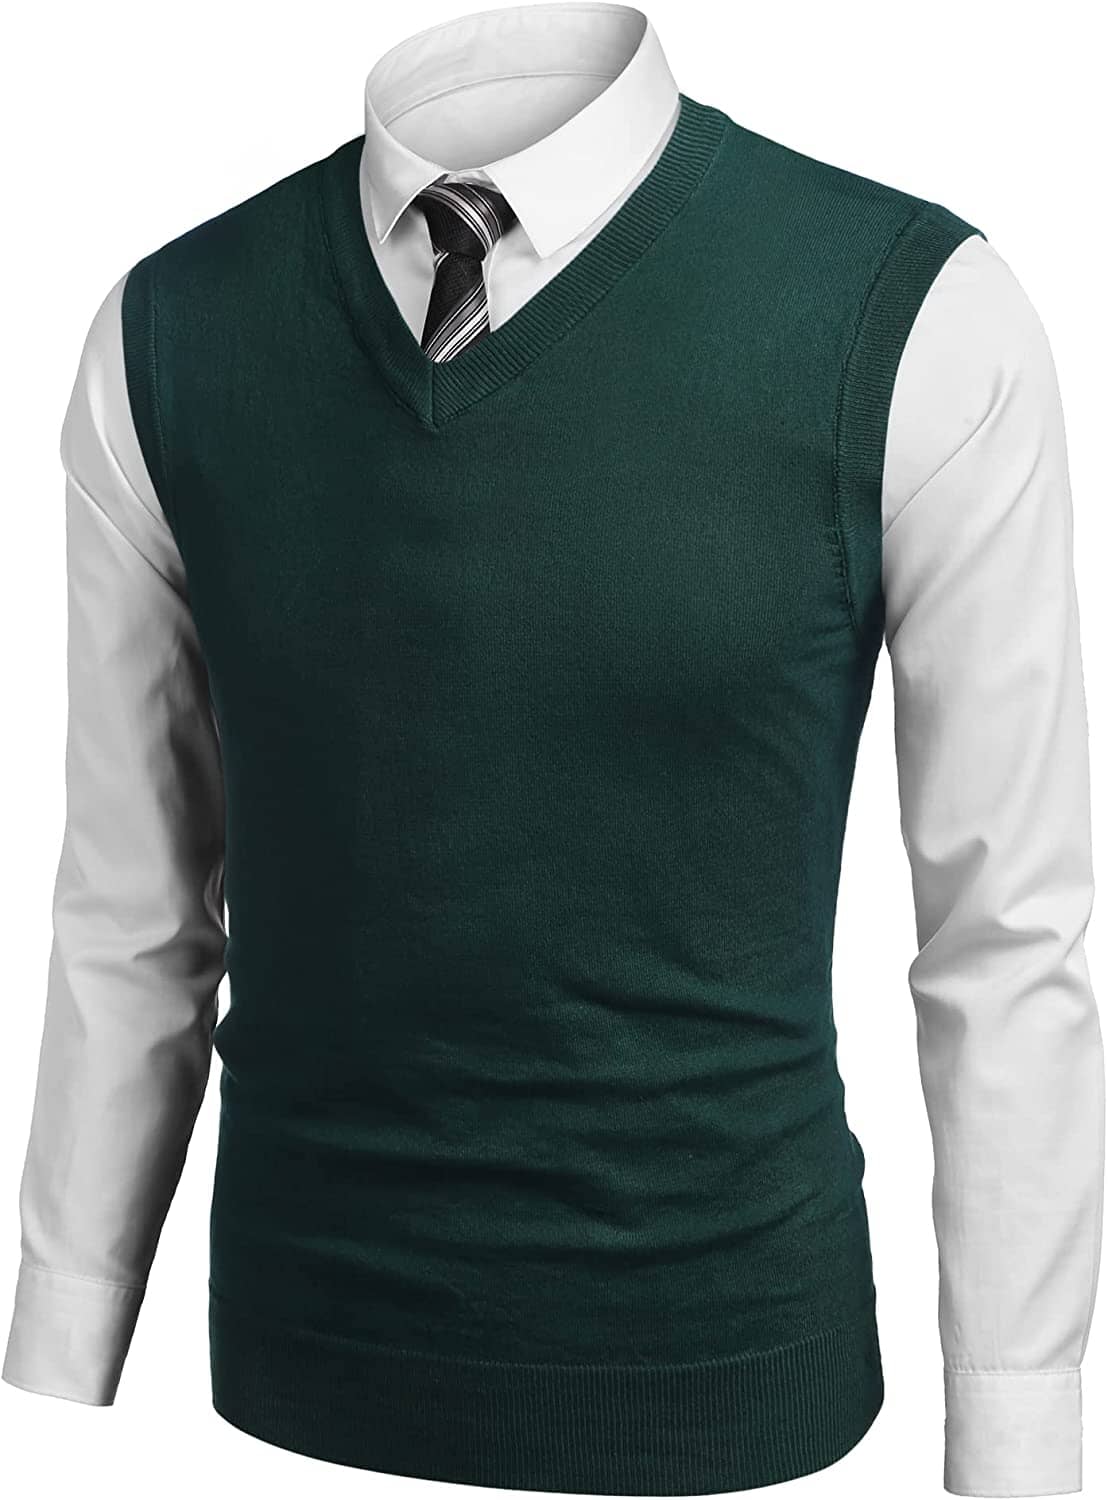 Solid V-Neck Sleeveless Knitted Vest (US Only) Vest COOFANDY Store Green M 